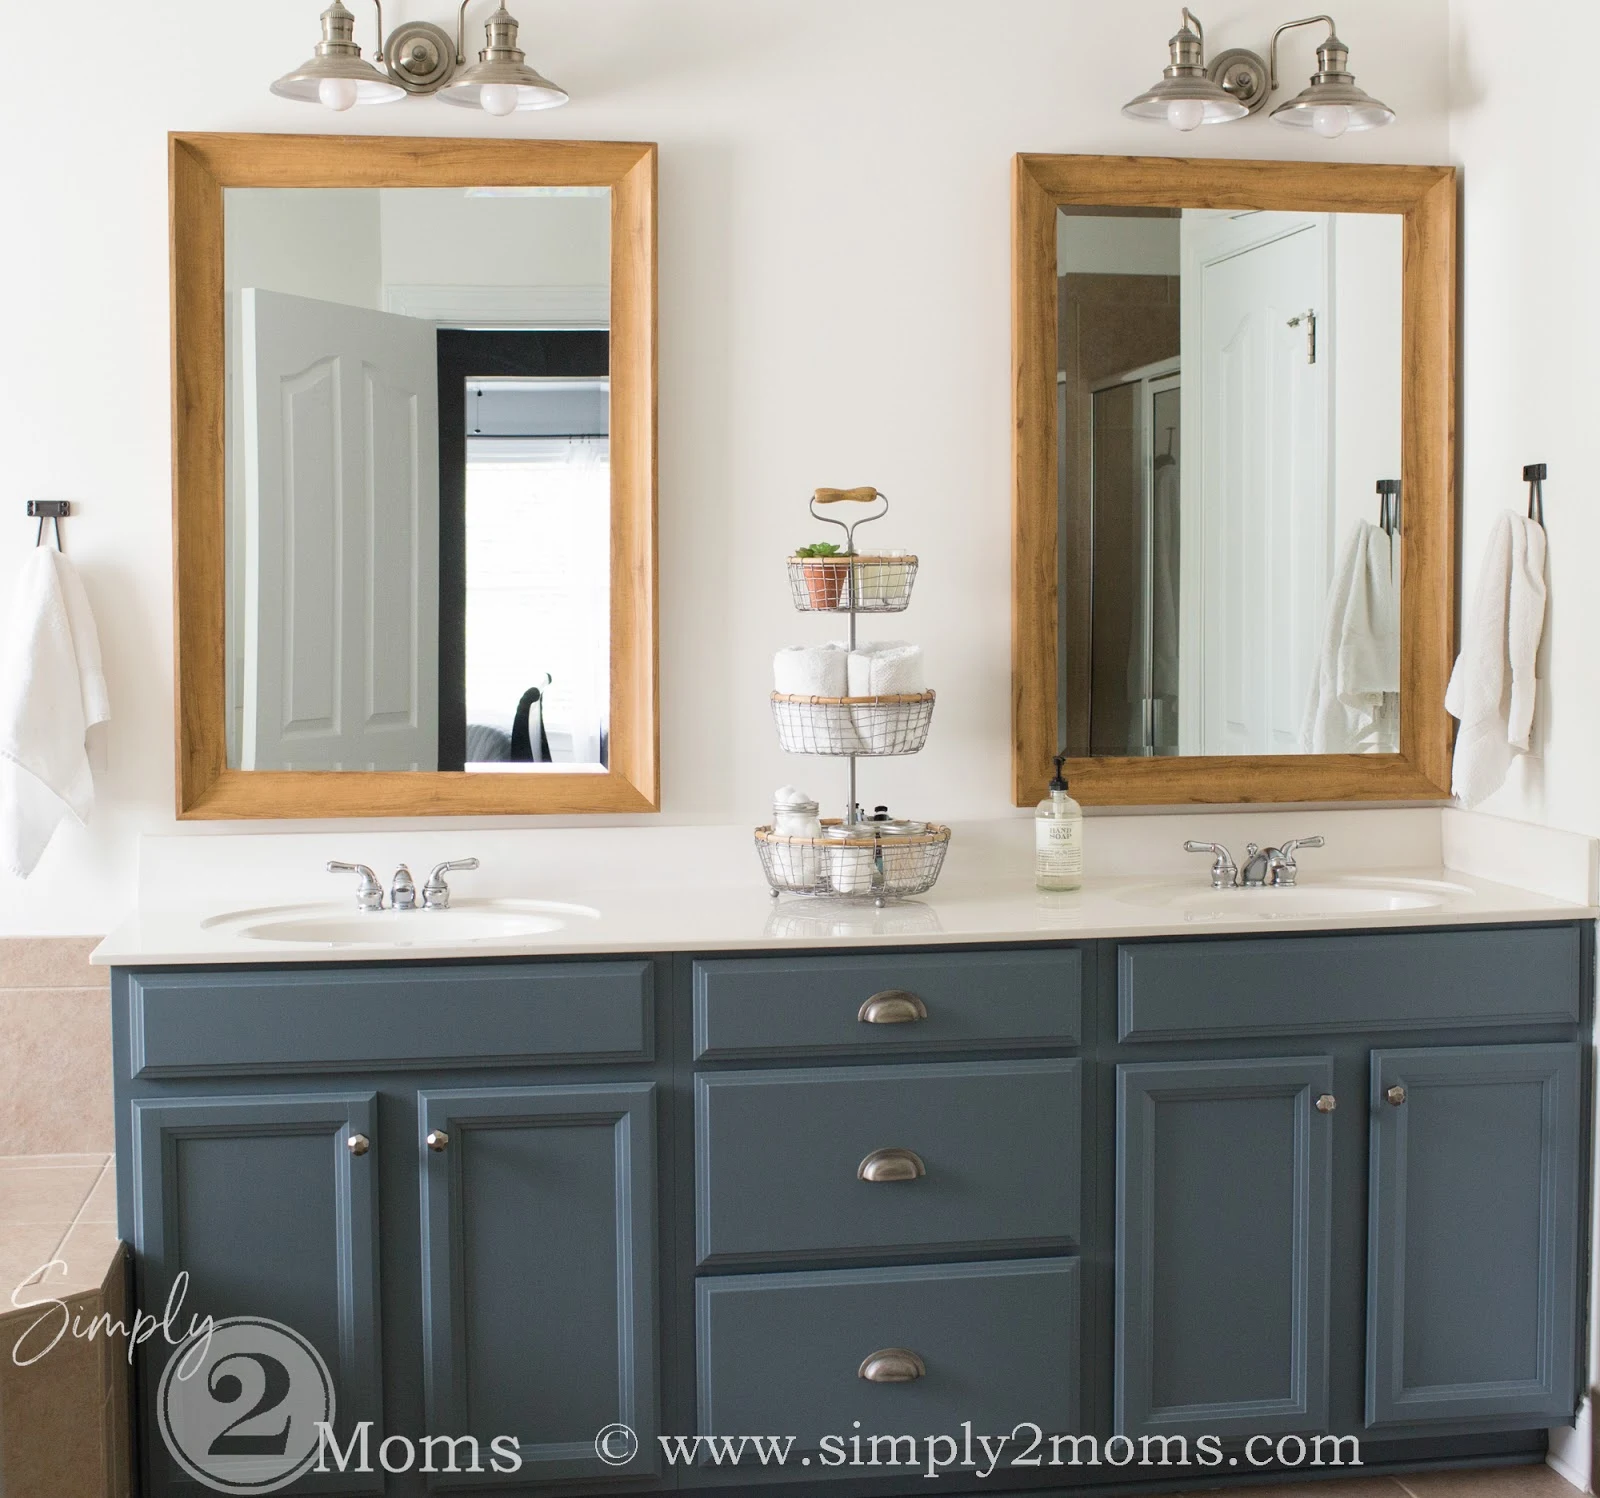 Easy changes in bathroom that don't cost a fortune